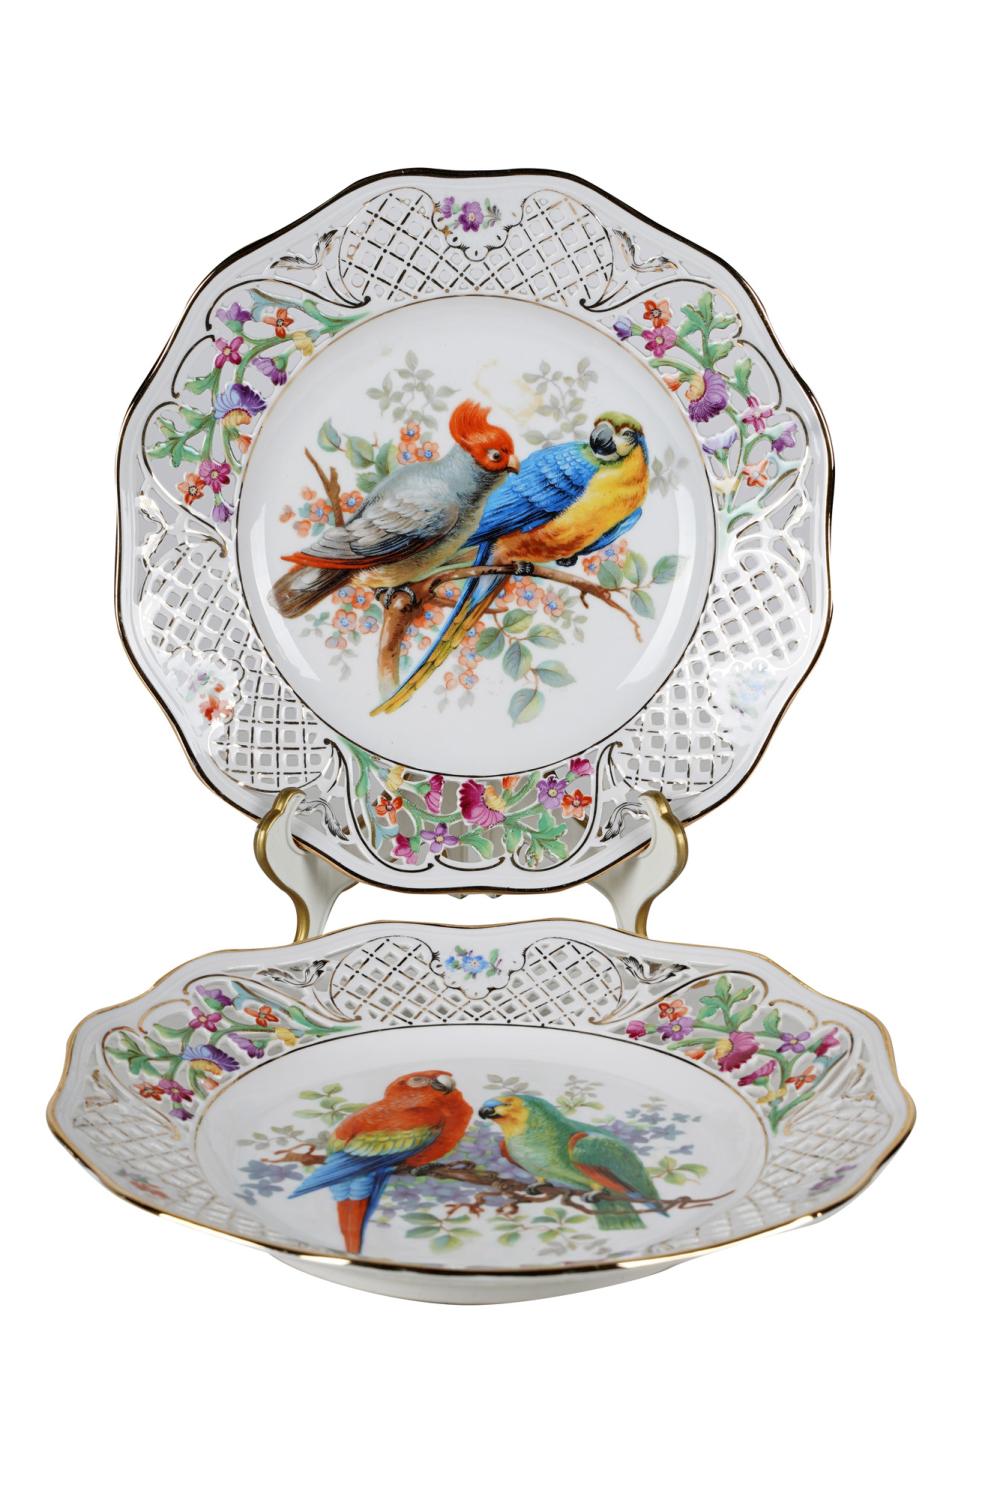 PAIR OF BAVARIAN PORCELAIN RETICULATED 3361df